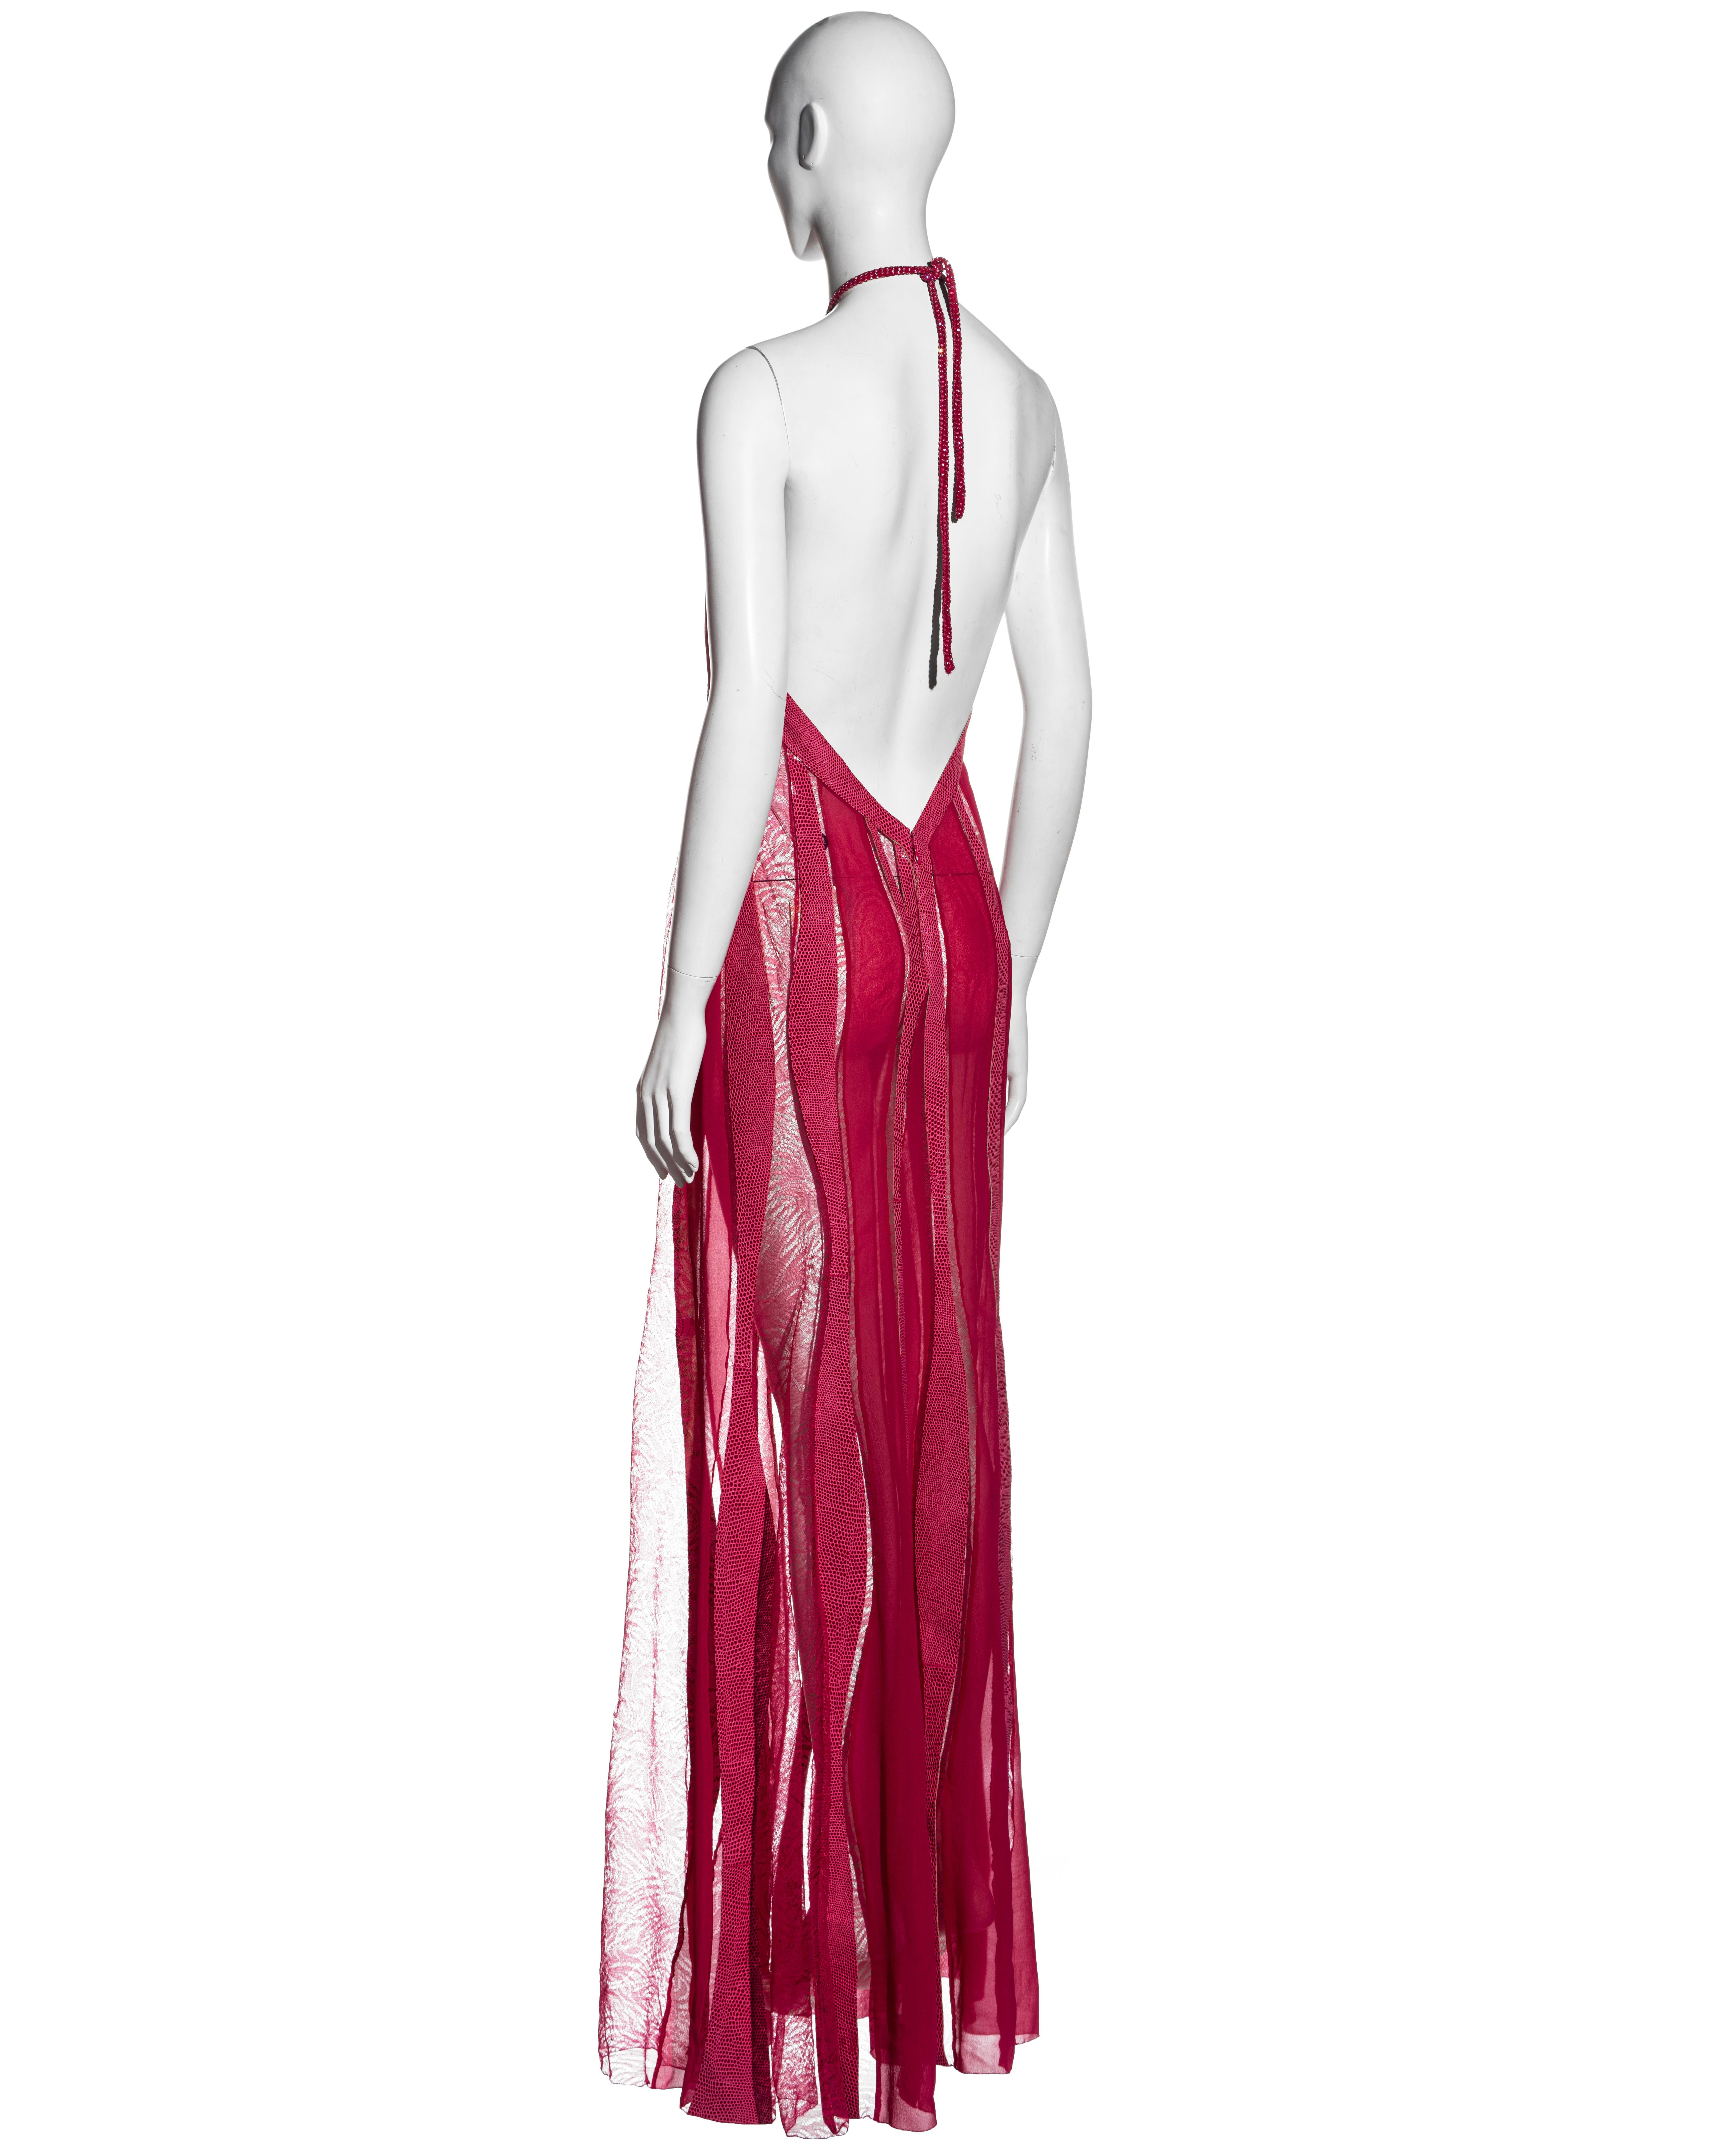 Gianni Versace pink silk, leather and lace halter neck maxi dress, fw 2000 In Excellent Condition For Sale In London, GB